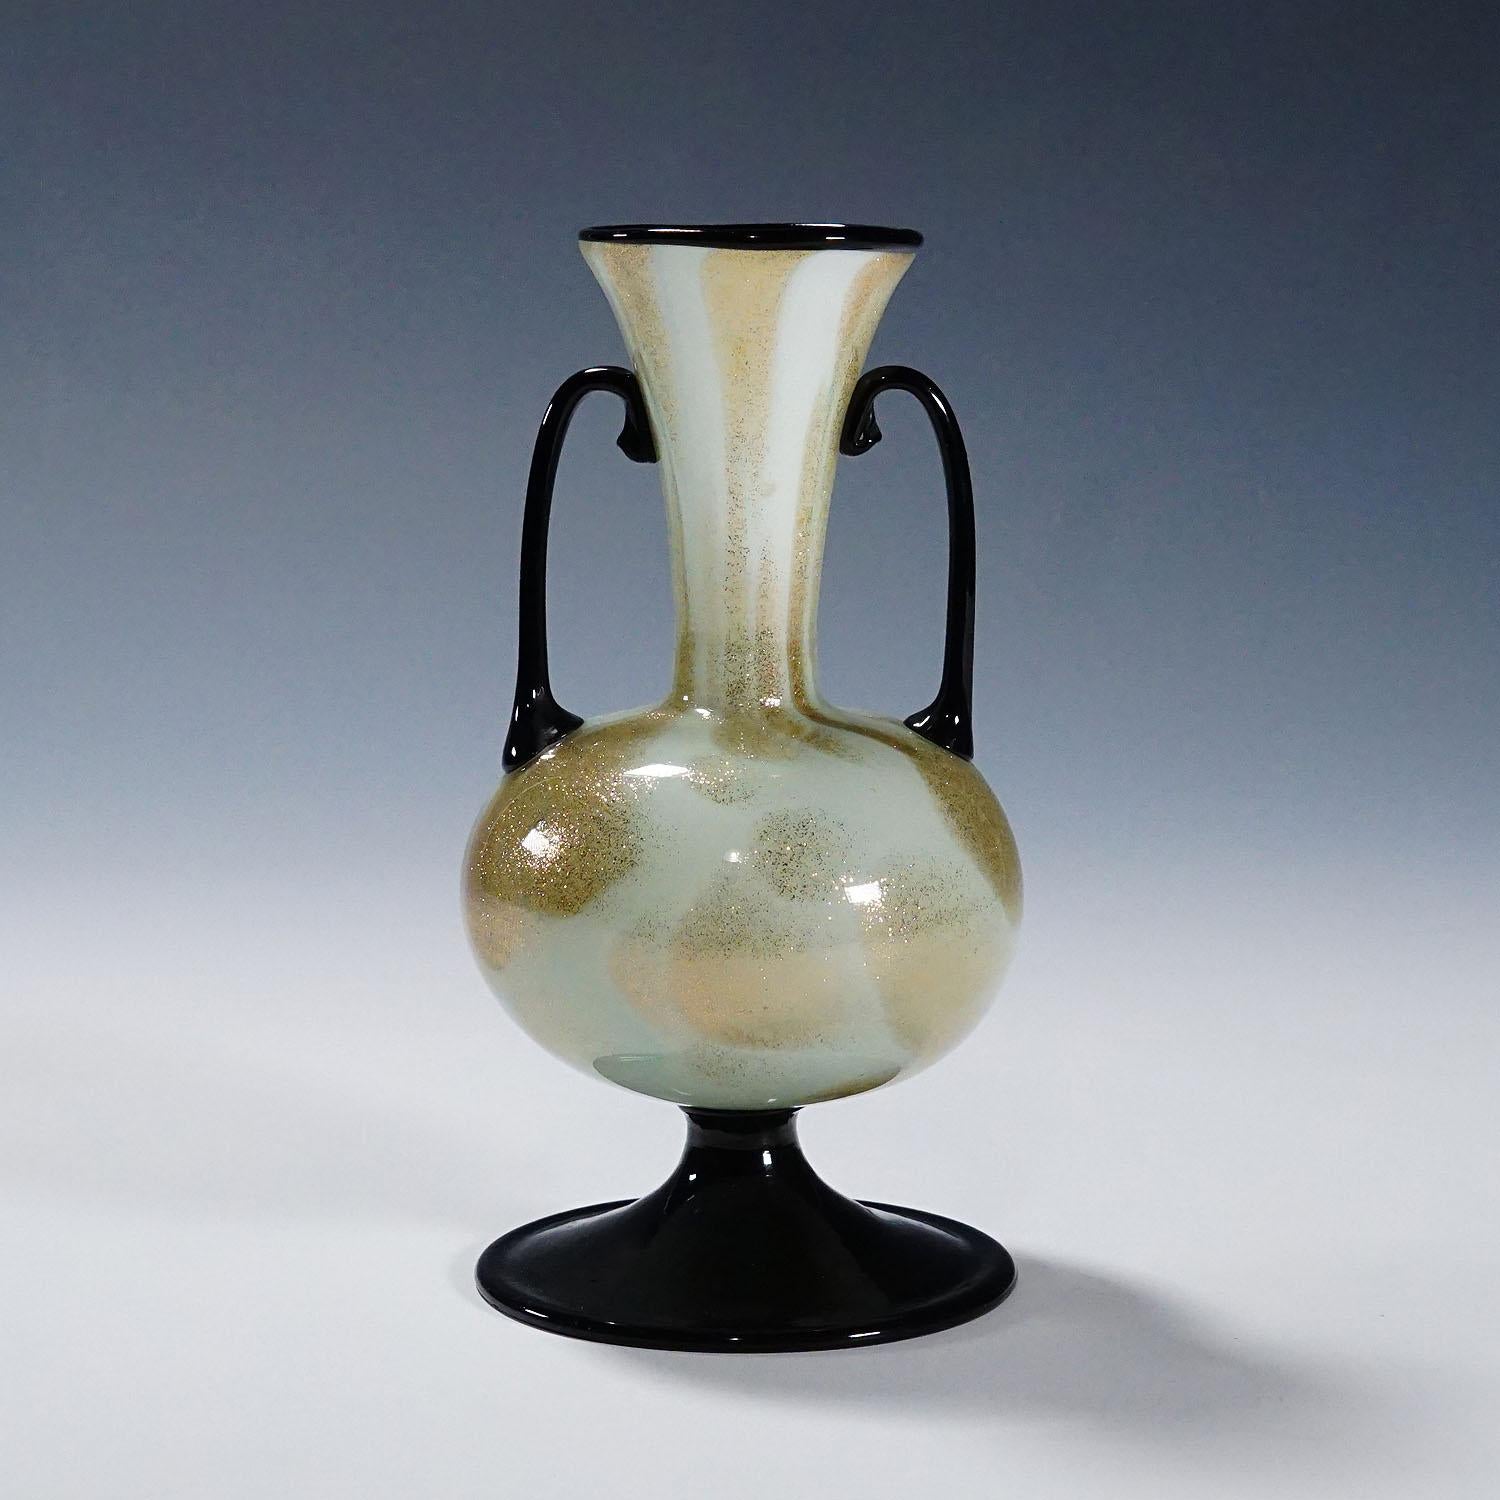 A Soffiato Glass Vase with Aventurine by Fratelli Toso (attr.), Murano ca. 1930s

A rare Murano art glass vase manufactured most probably by Fratelli Toso around 1930s. Thin opaque white glass with aventurine inclusions and applied foot, handles and